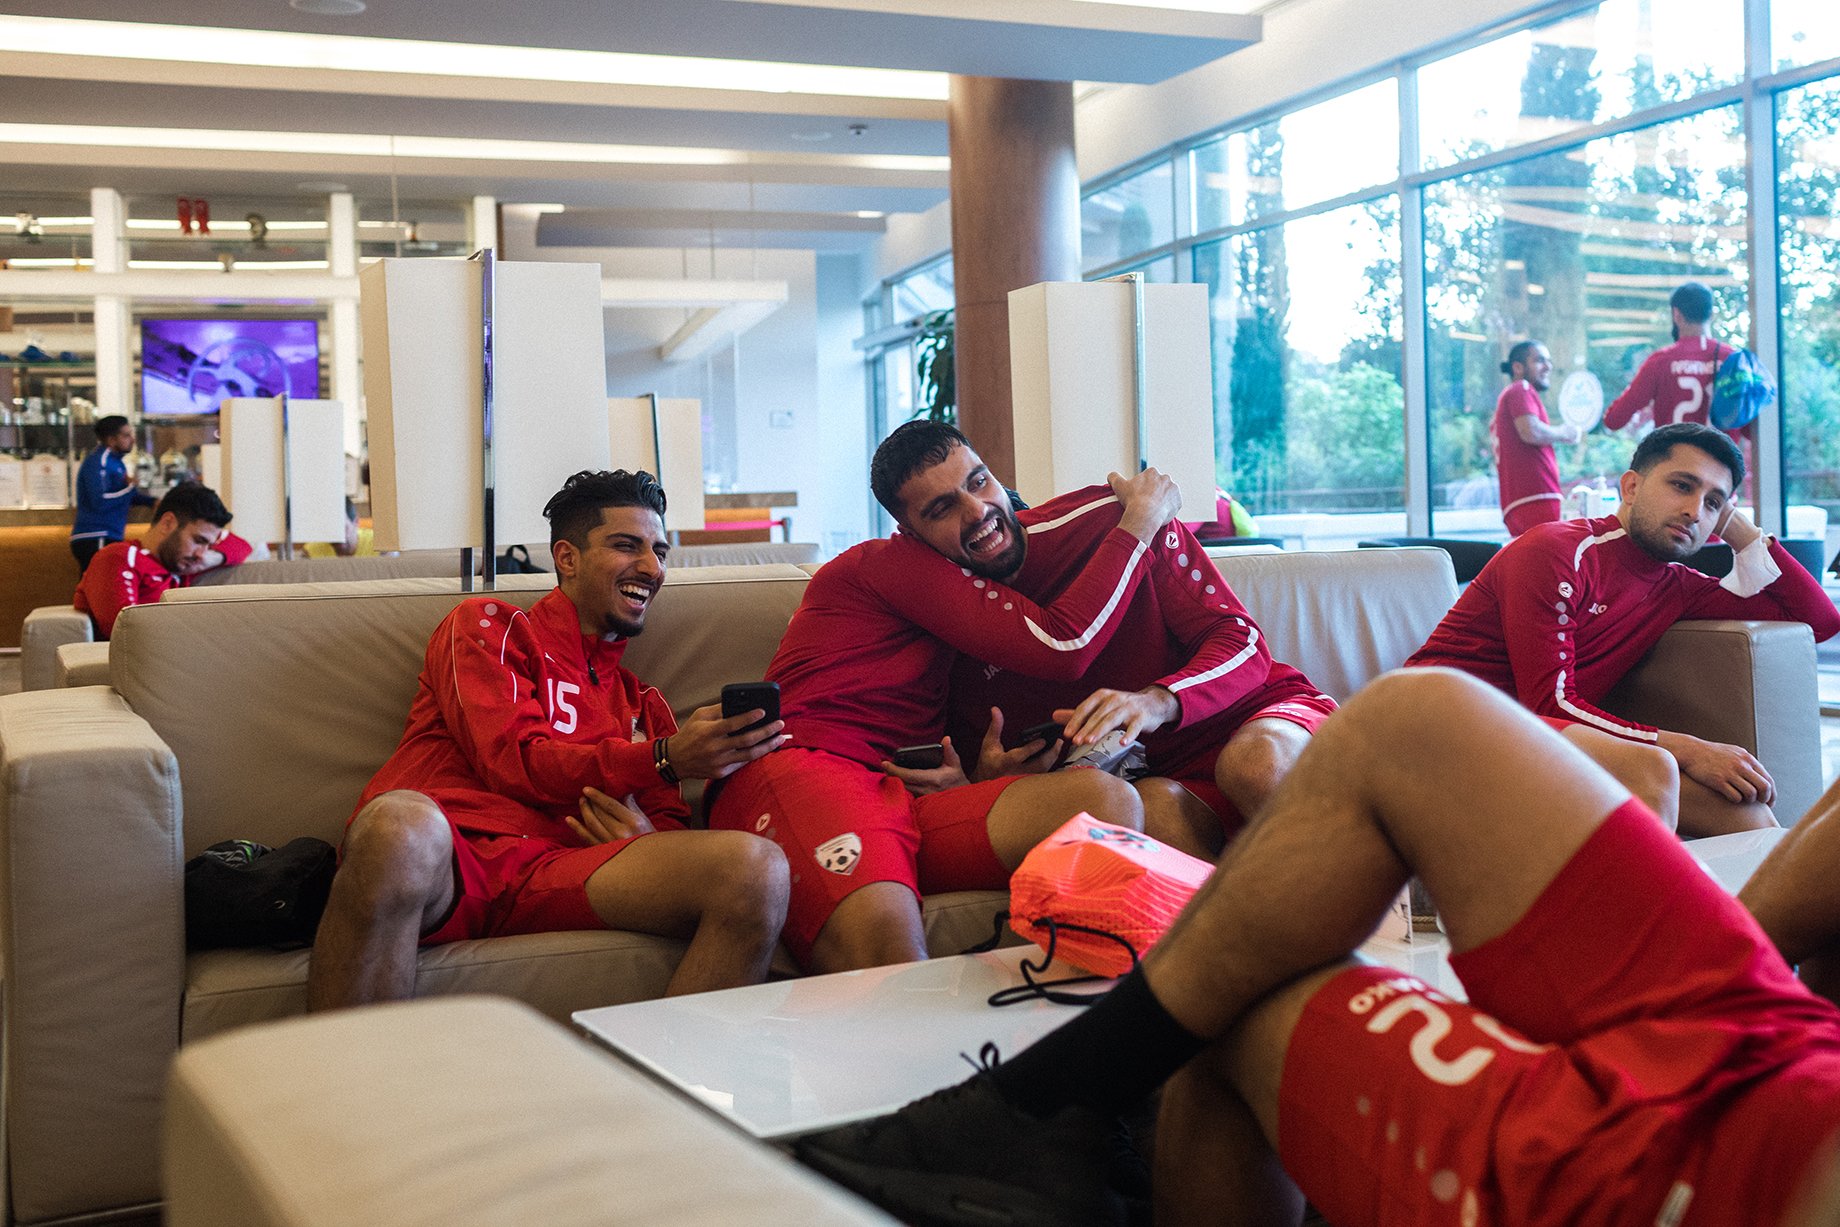 The Afghanistan National soccer team players rest and joke at the Gloria Sports Arena, Antalya, Turkey, before their international friendly match with Indonesia. Shot by Bradley Secker for the New York Times.